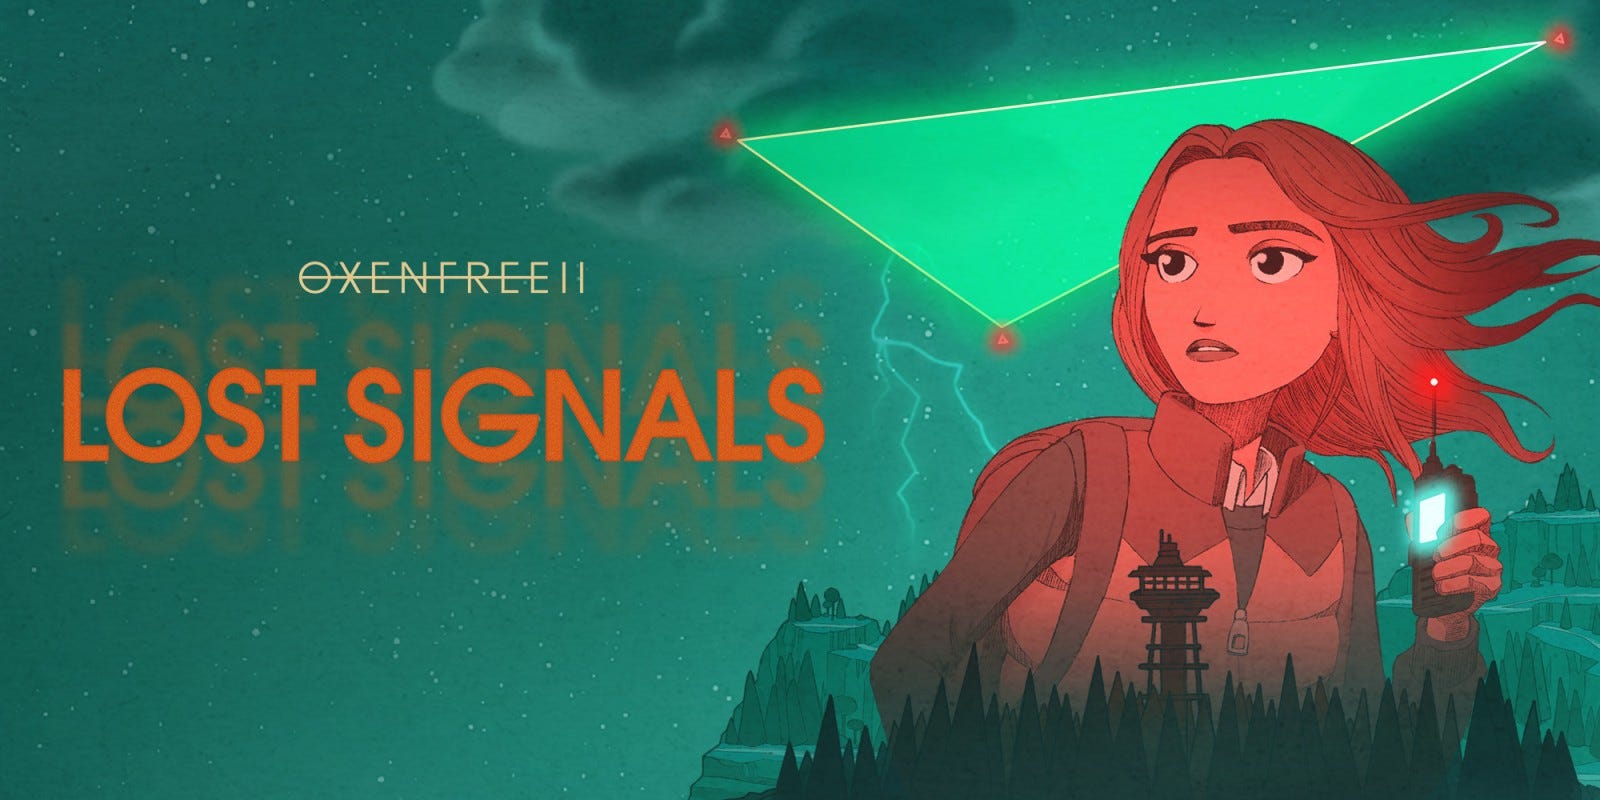 Review — Oxenfree II: Lost Signals | by Quentin Clemens | Tasta